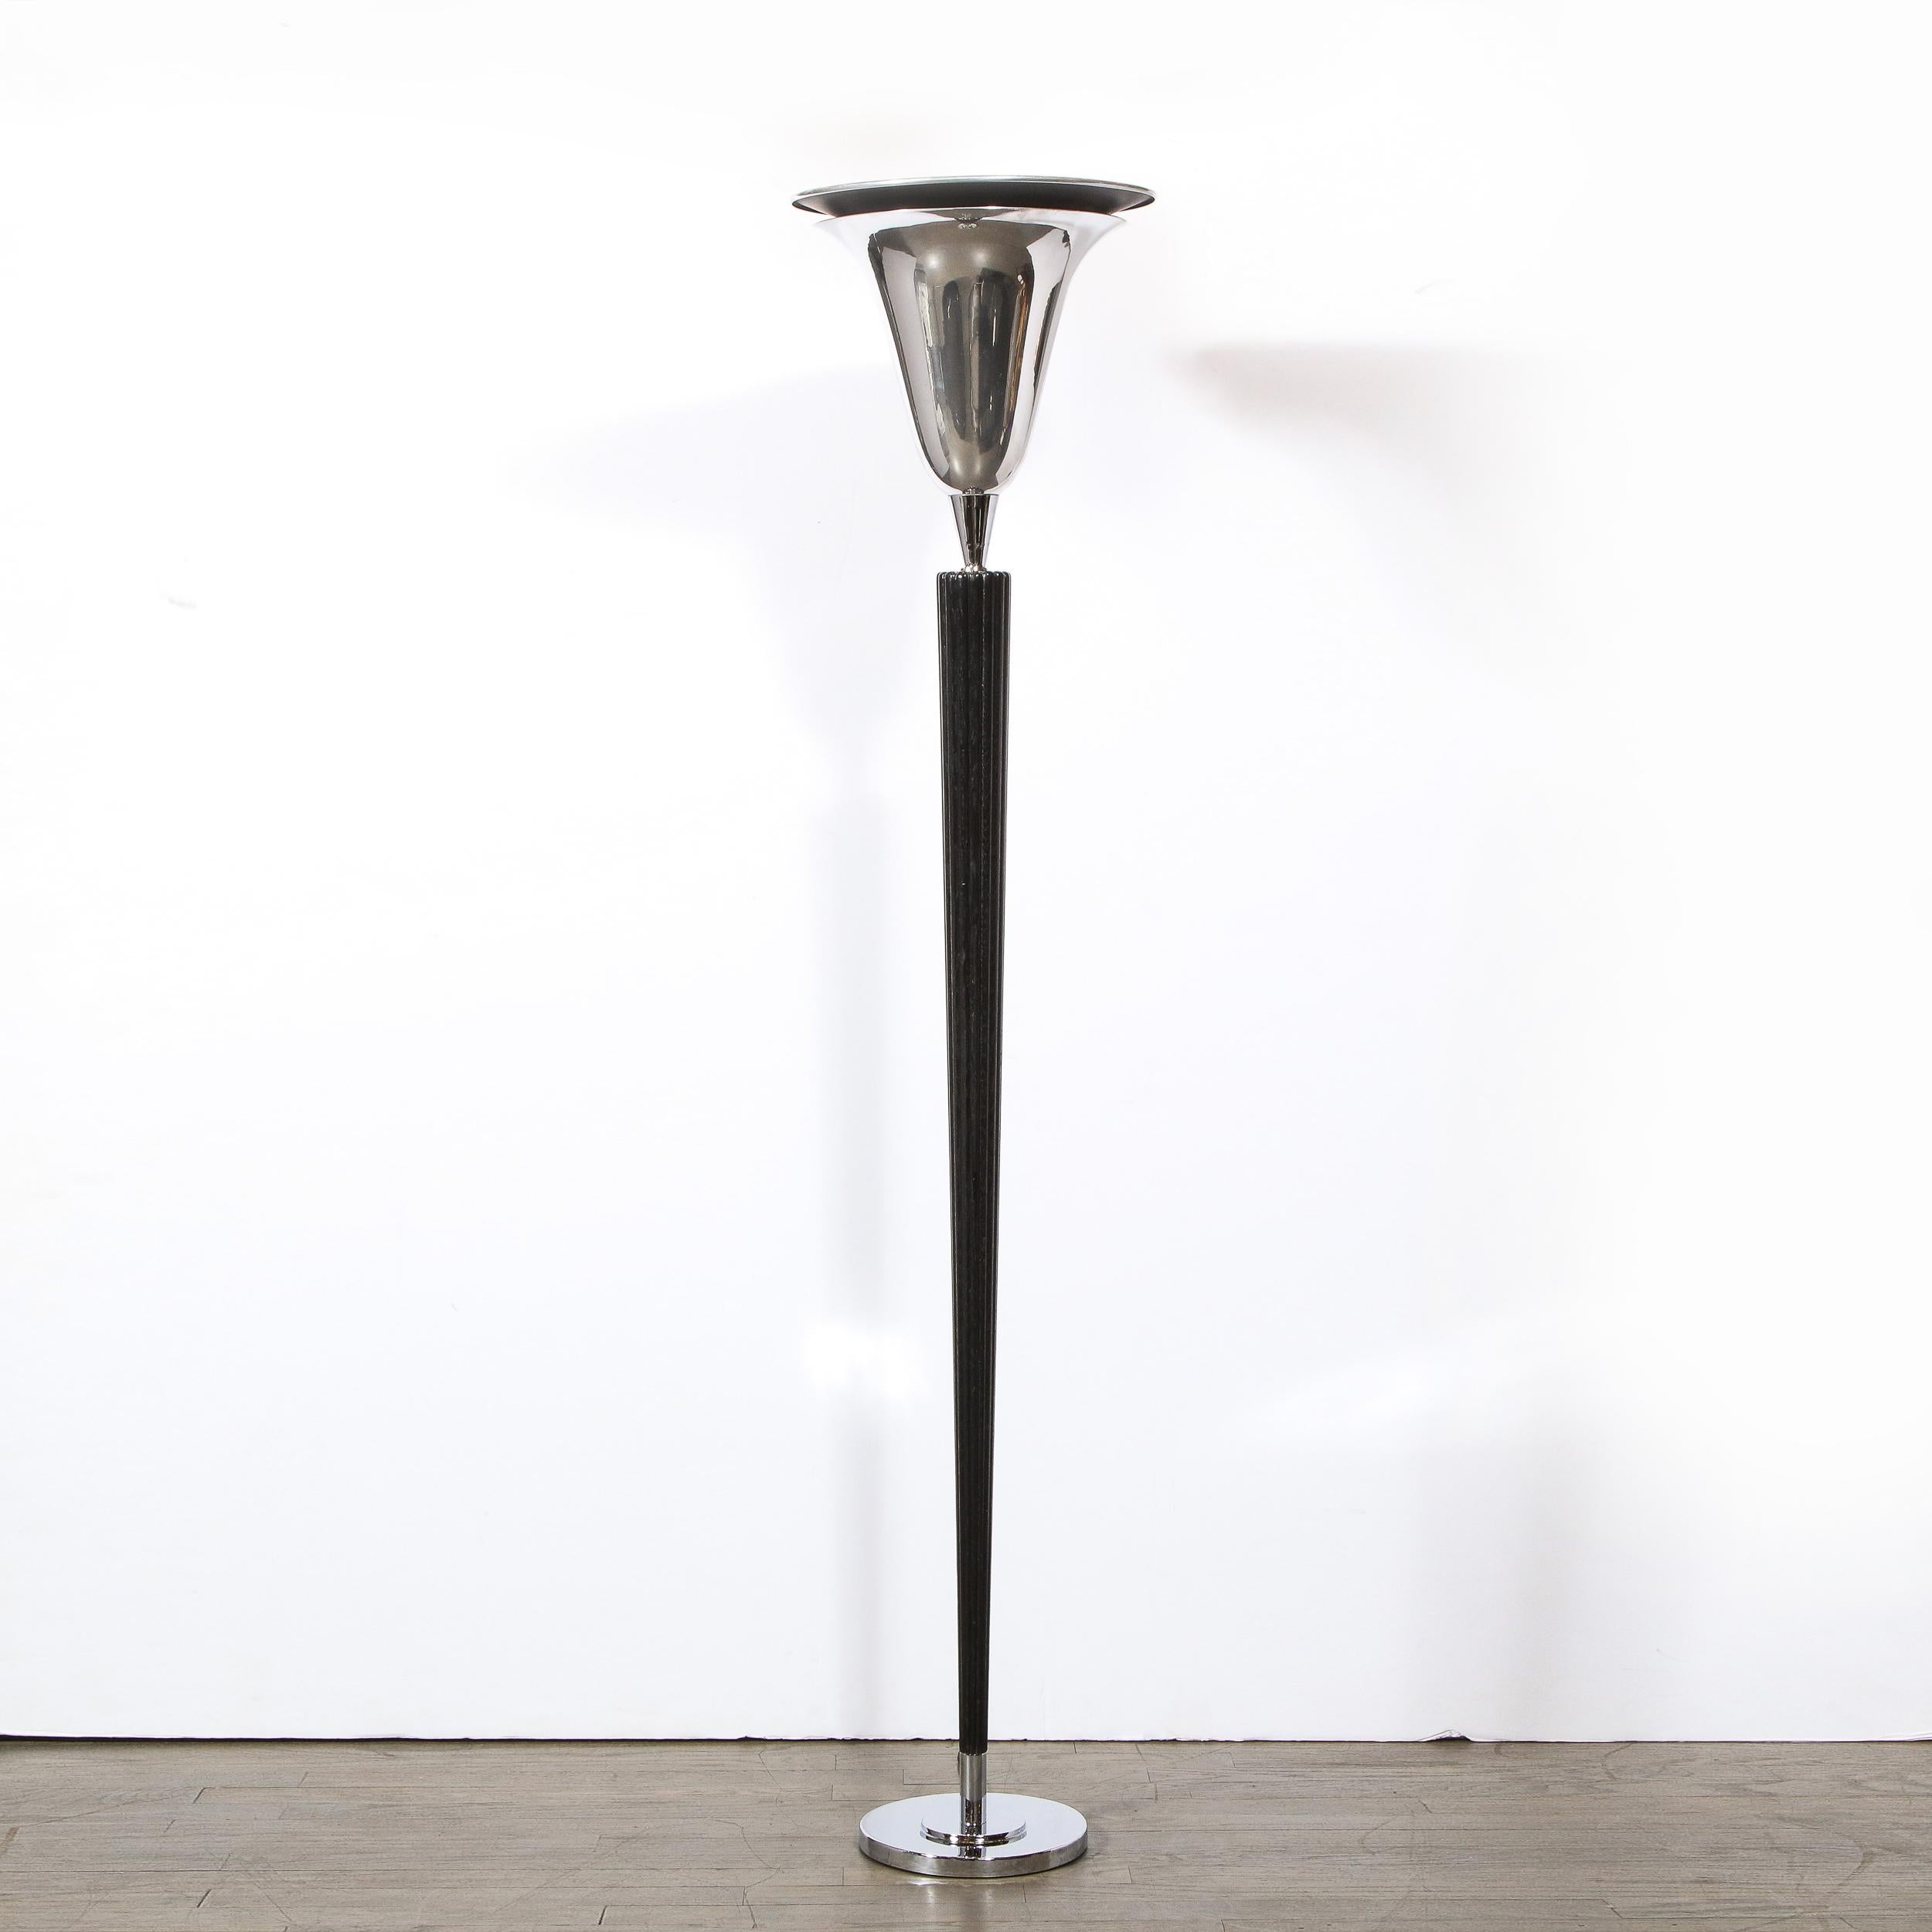 This elegant Art Deco torchiere was realized in the United States, circa 1940. It features a skyscraper style circular tiered base; a channeled ebonized walnut body that tapers to its nadir; and a two-tiered billowing shade in lustrous chrome. With